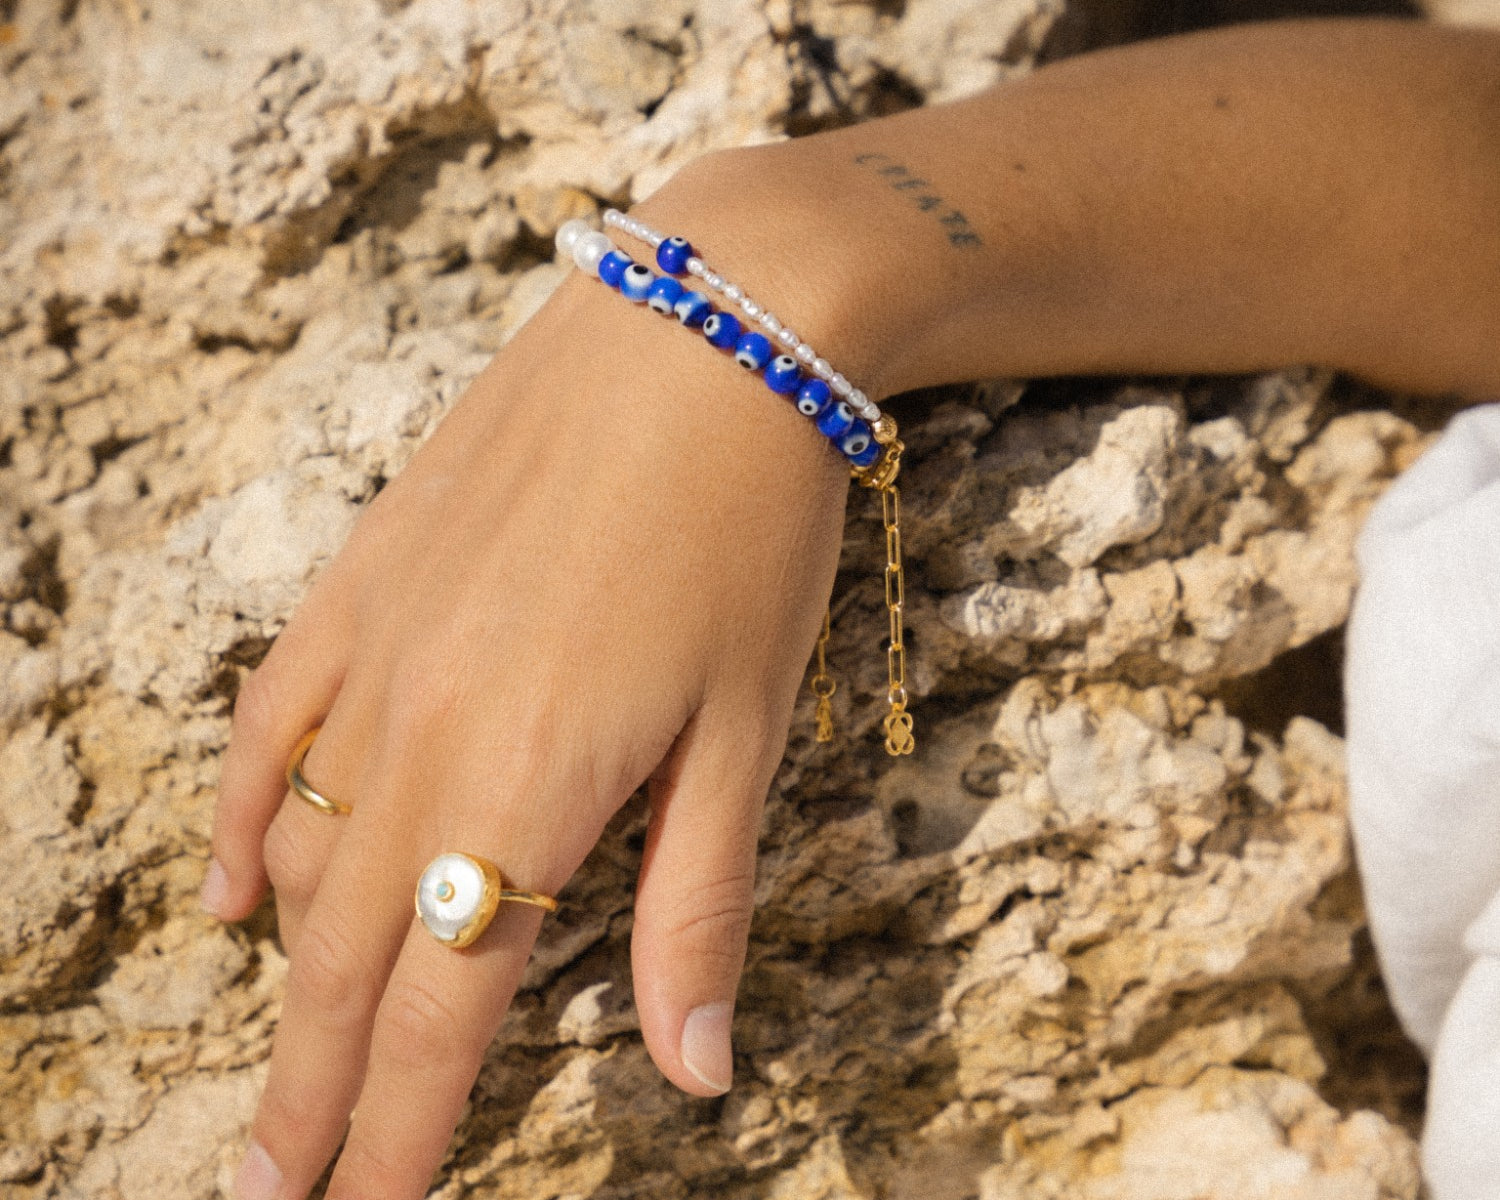 Mila Evil Eye and Pearl Beaded Bracelet | Sustainable Jewellery by Ottoman Hands